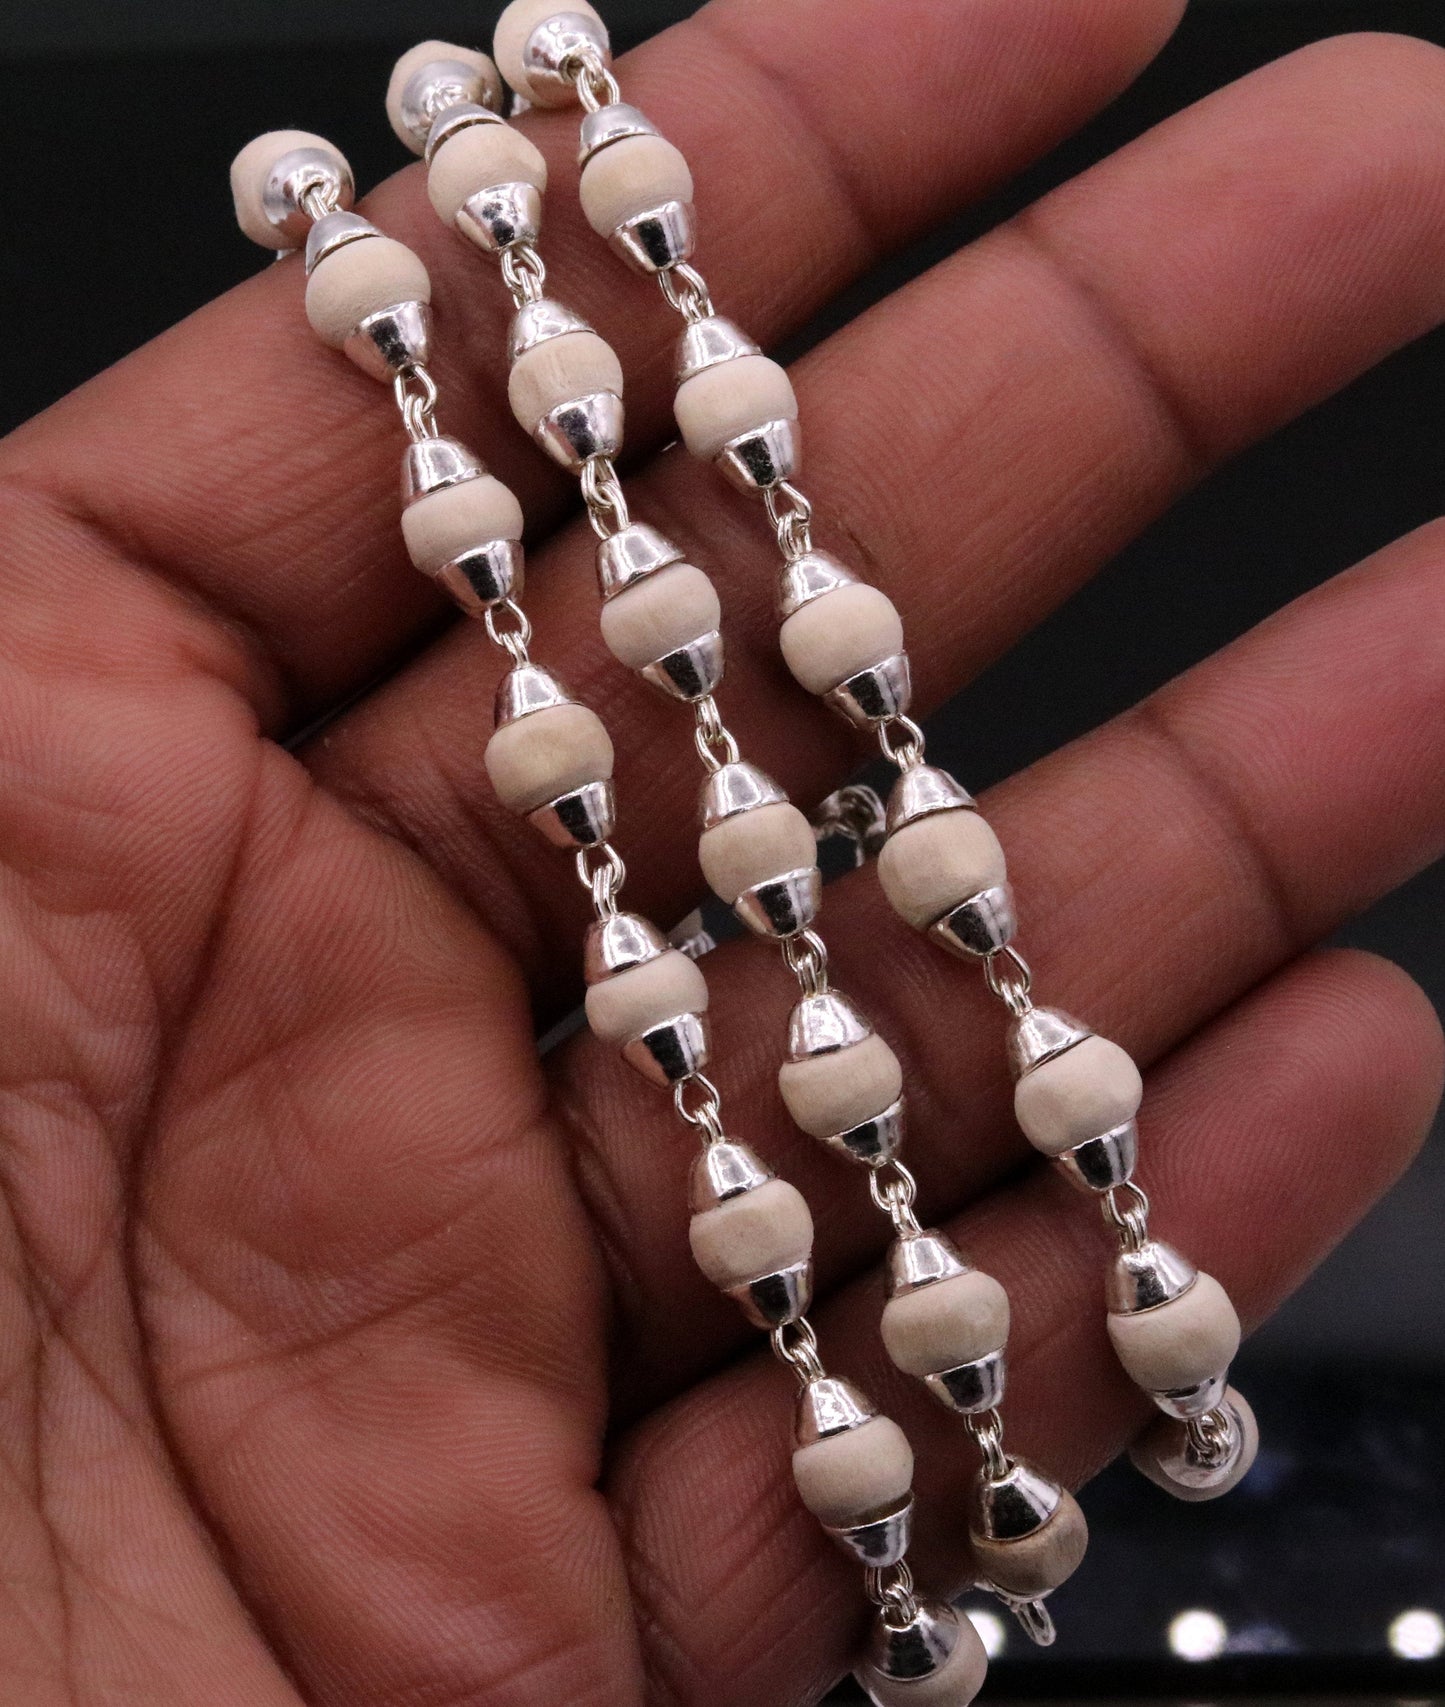 925 Silver handcrafted Basil rosary plant beads necklace chain tulsi mala use for Ayurveda for feel protected and focused from India ch18 - TRIBAL ORNAMENTS